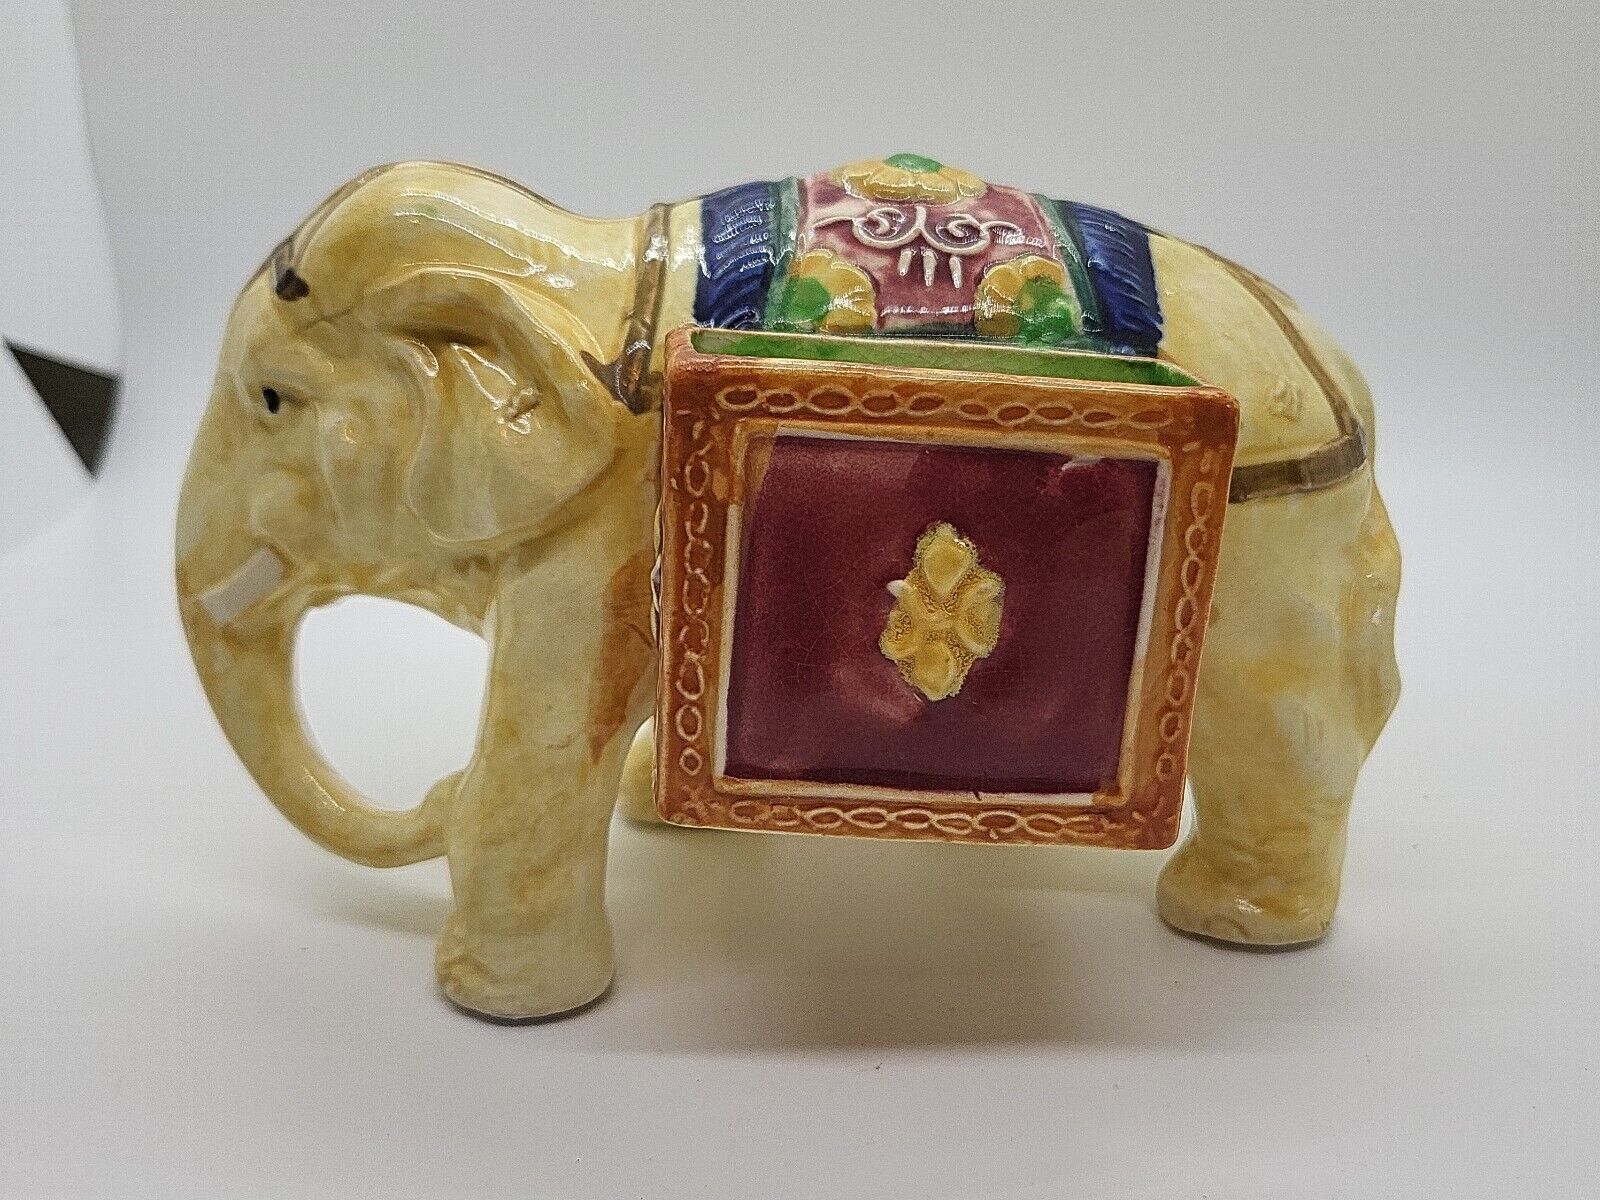 Japan Colorful Hand Painted Elephant with Saddle Cigarette & Match Holder